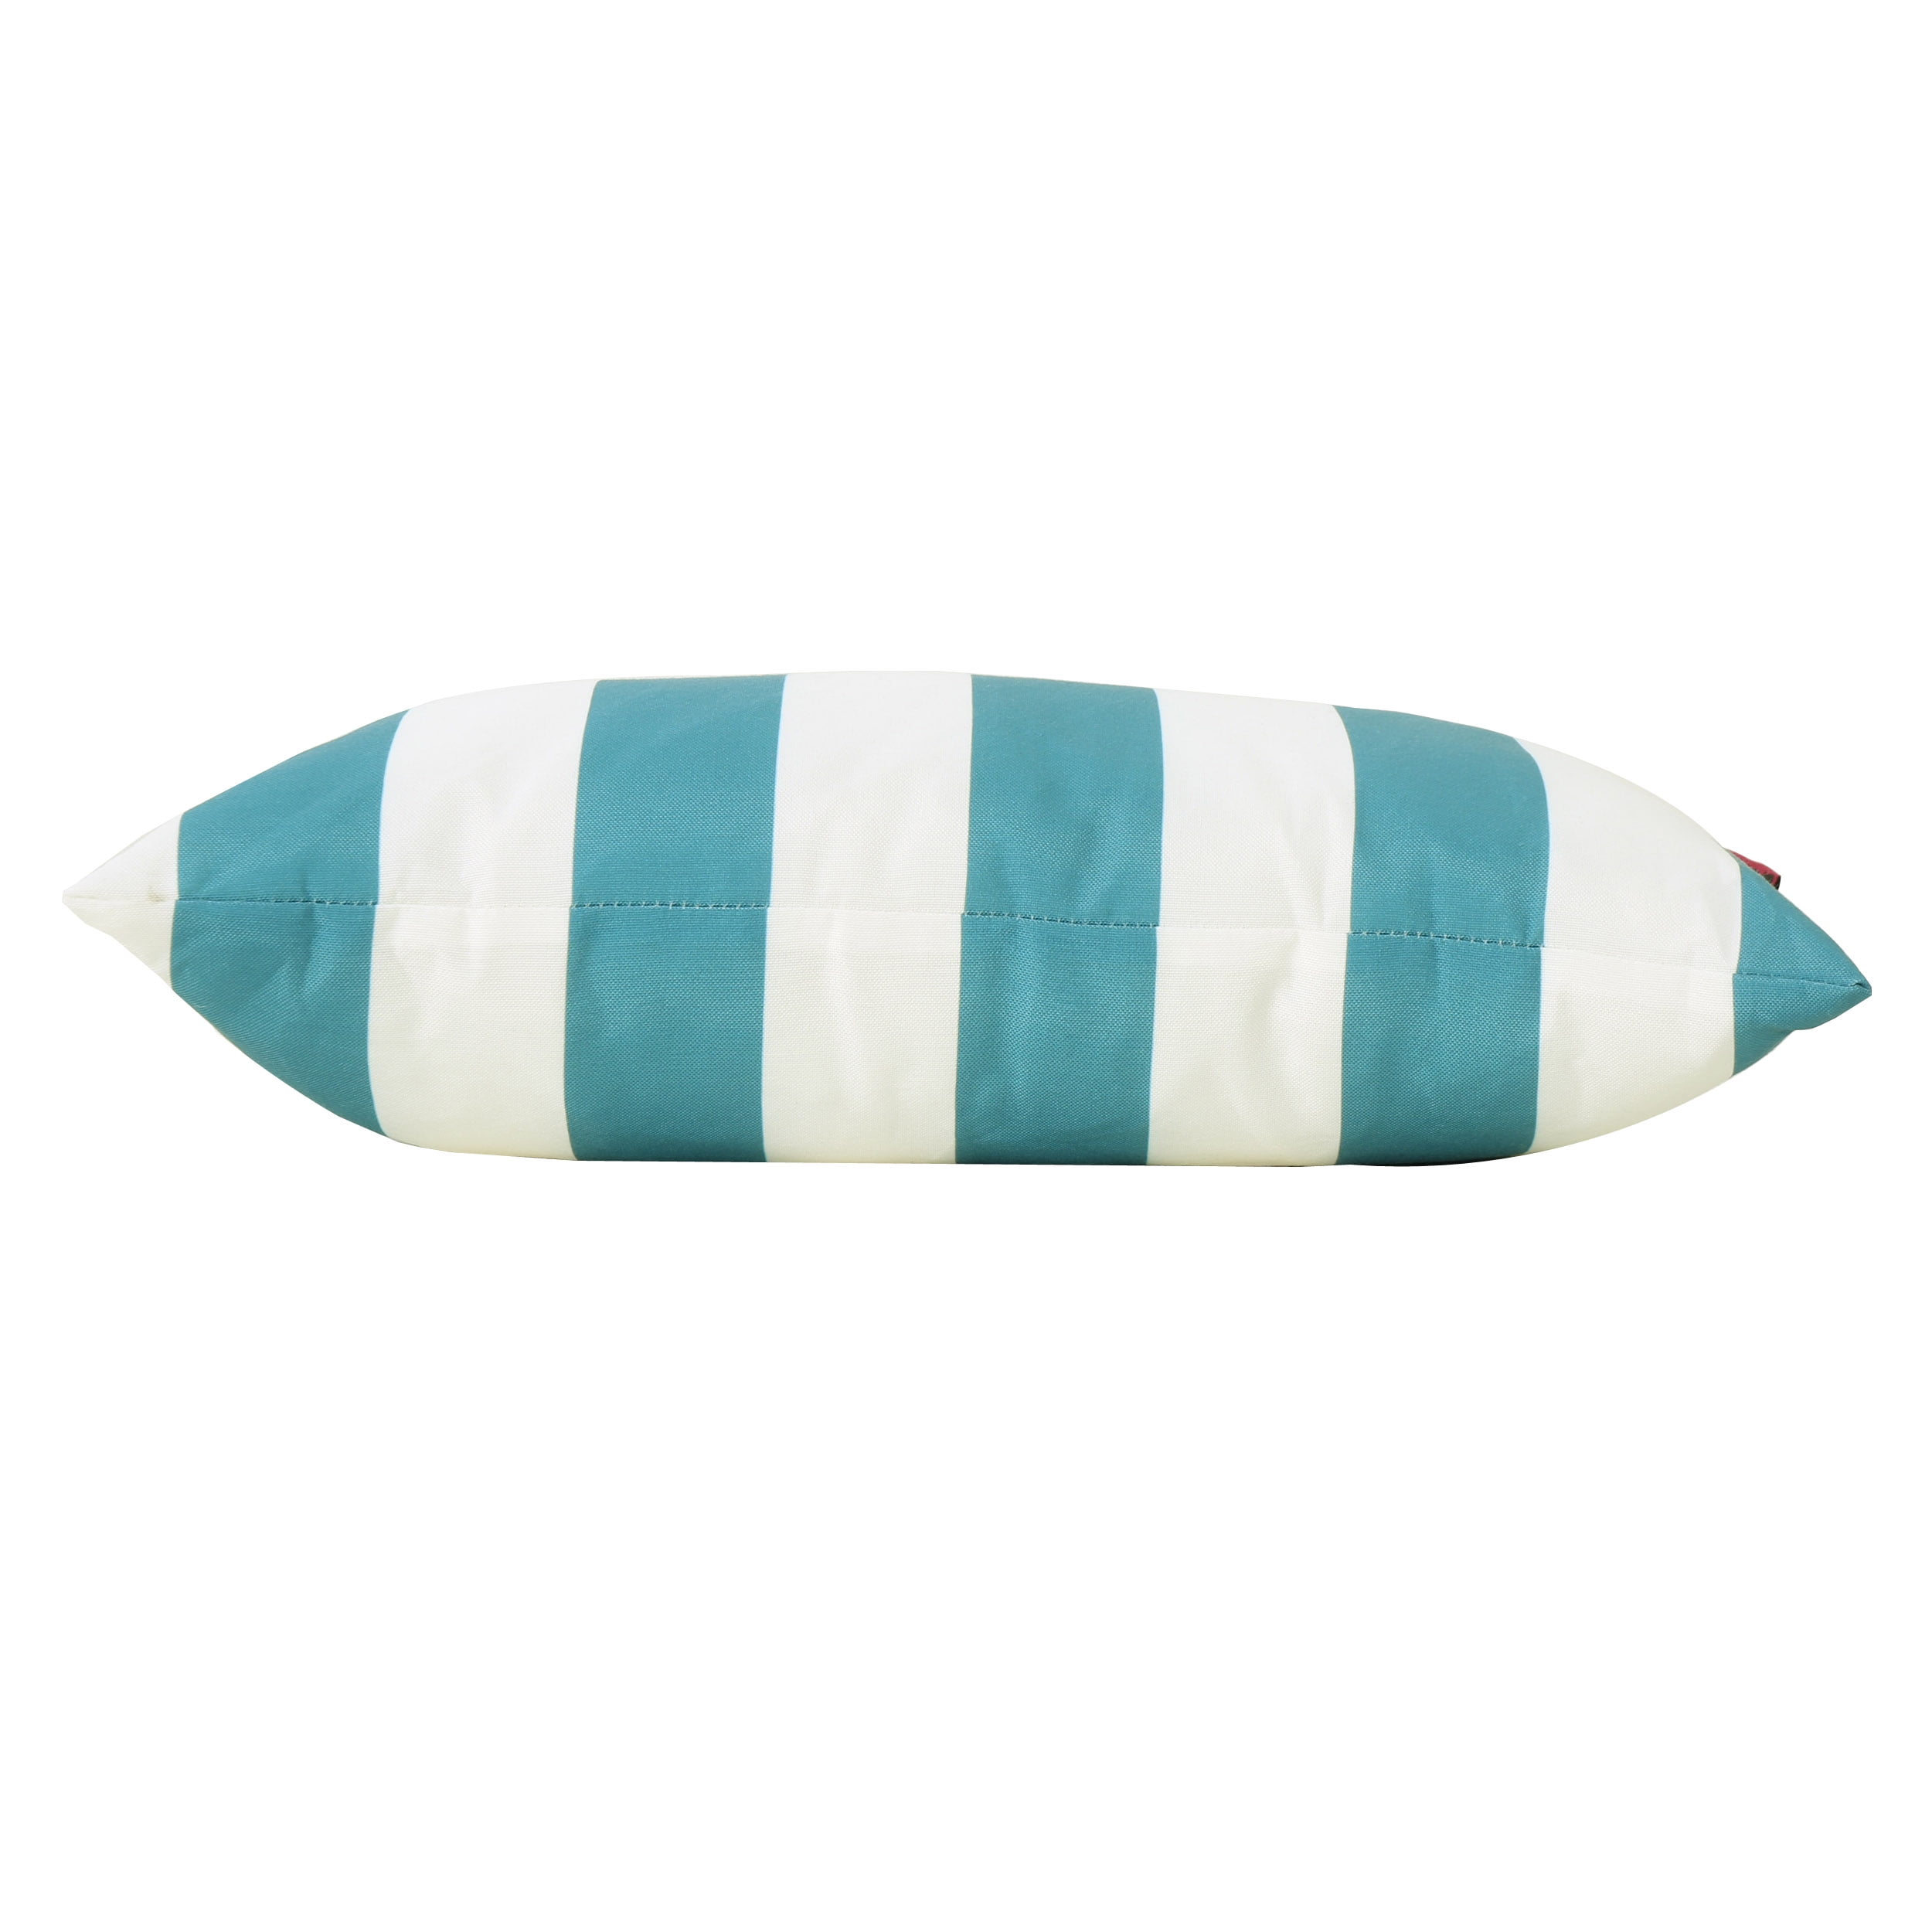 La Jolla Outdoor Striped Water Resistant Square Throw Pillows - Set of 4  Dark Teal/White -, 1 unit - Gerbes Super Markets